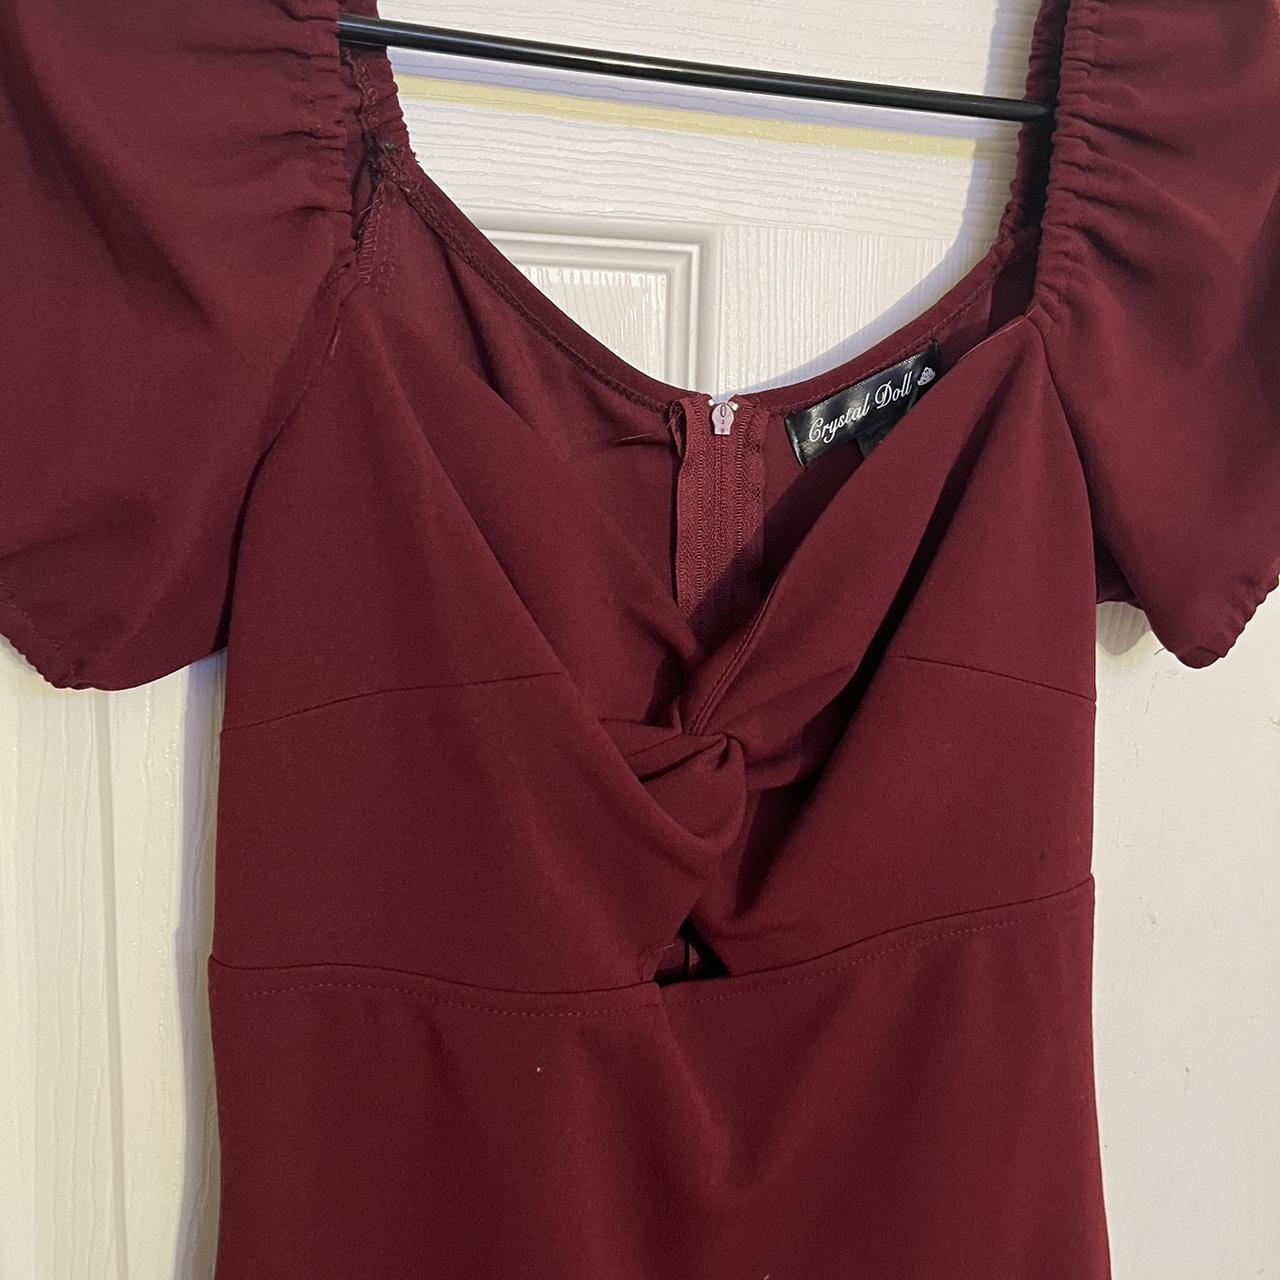 Crystal Doll Women's Burgundy and Red Dress (3)